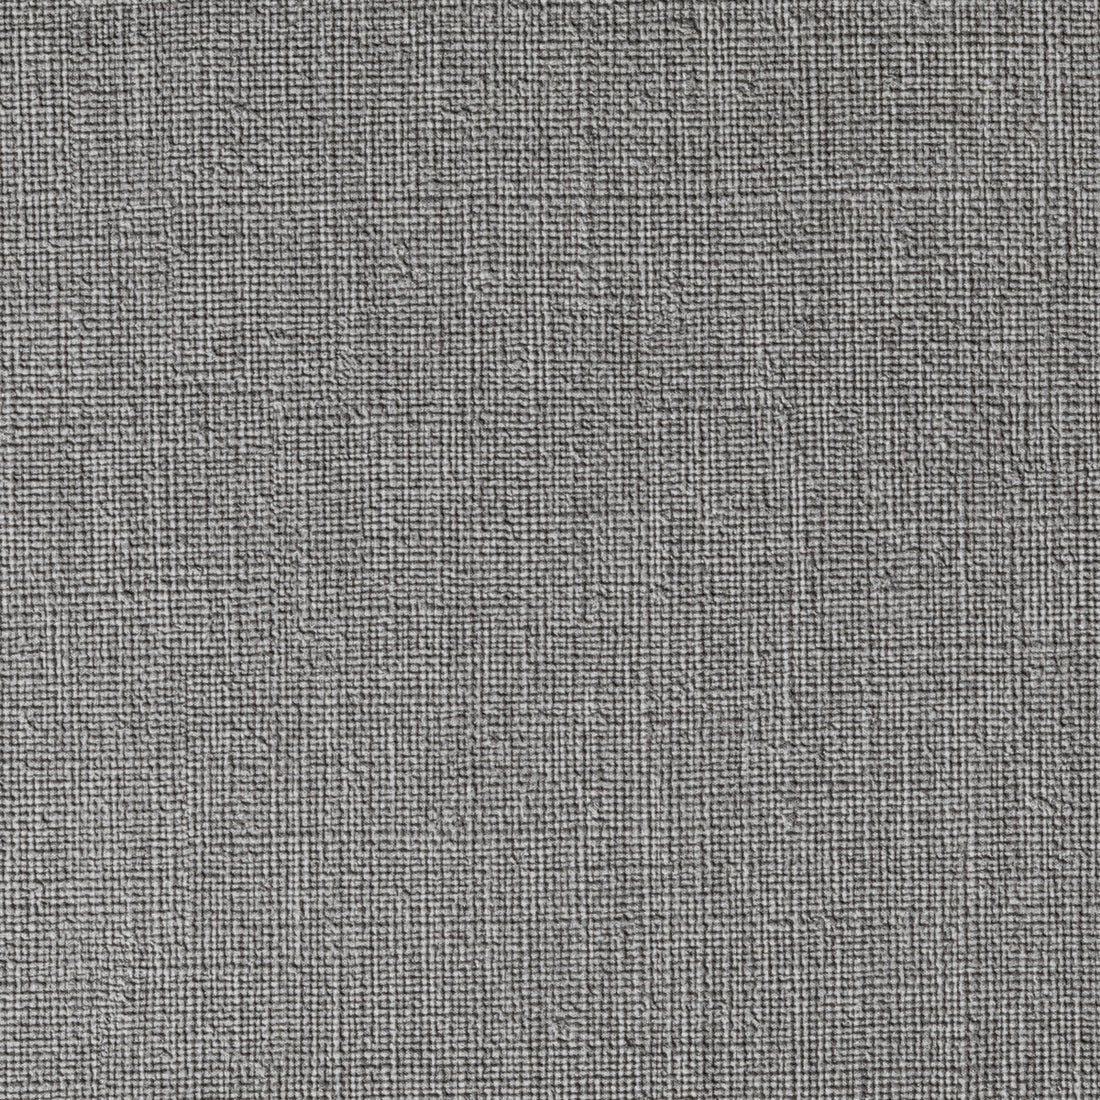 Caslin fabric in mercury color - pattern CASLIN.21.0 - by Kravet Contract in the Foundations / Value collection